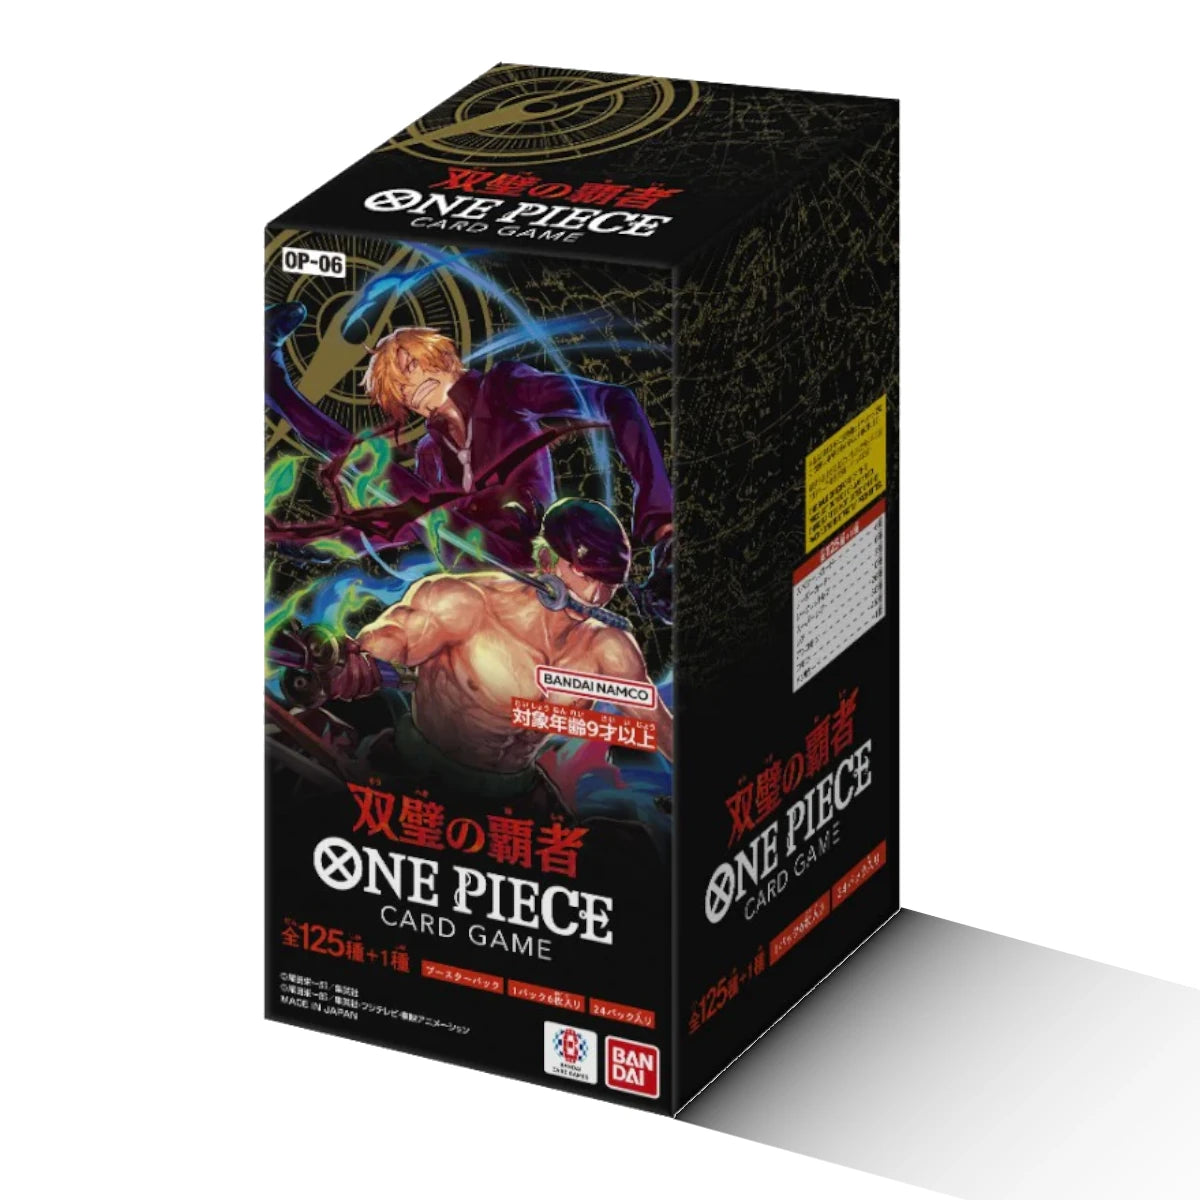 One Piece Twin Champions Booster Box (双璧の覇者 OP06) – Moxie 